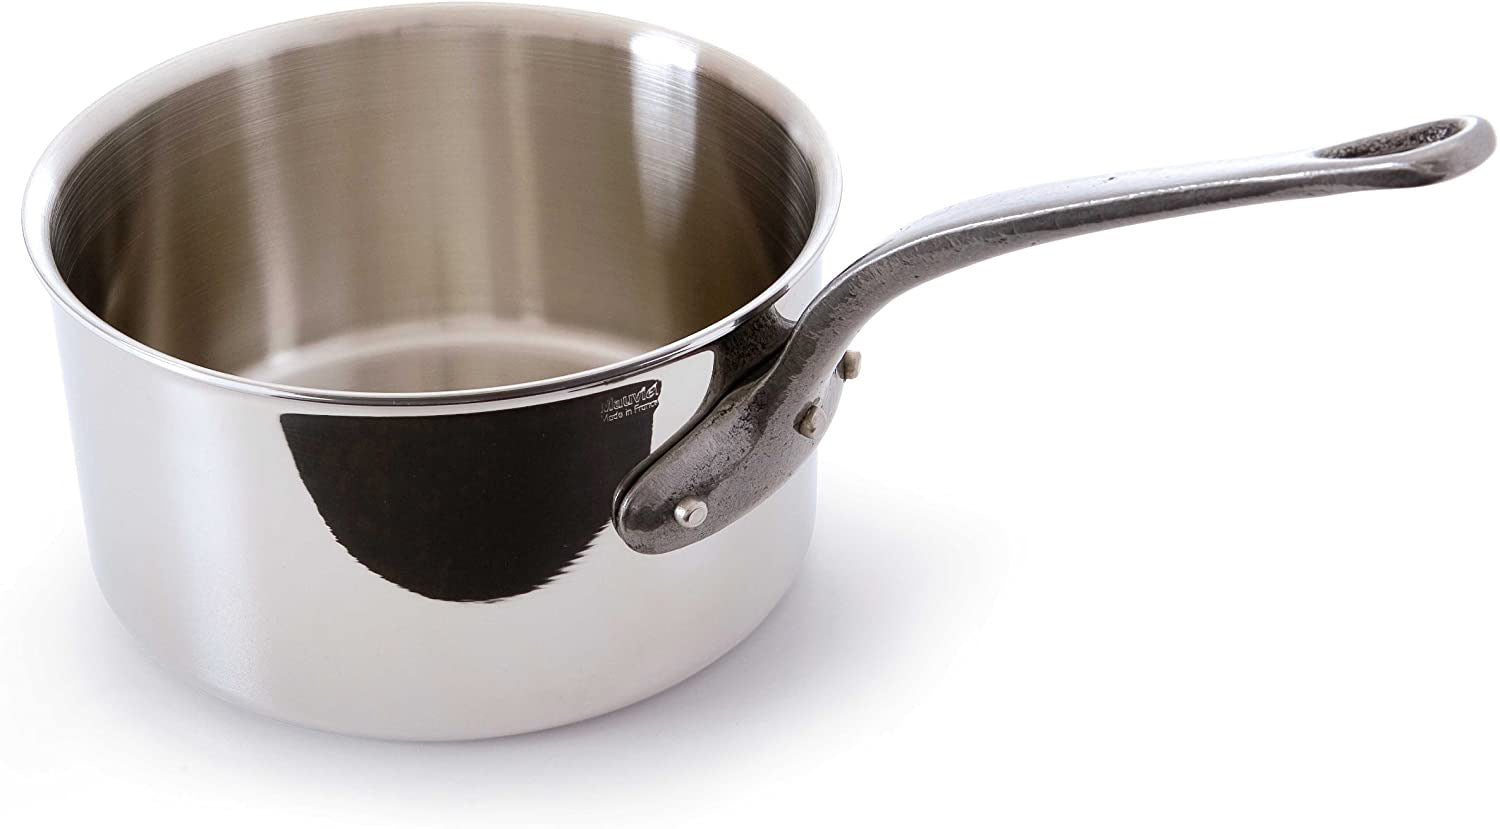 Mauviel M'Cook Ci 1.9 Quart Stainless Steel Covered Saucepan w/Cast Iron Handle, 6.3 Inch